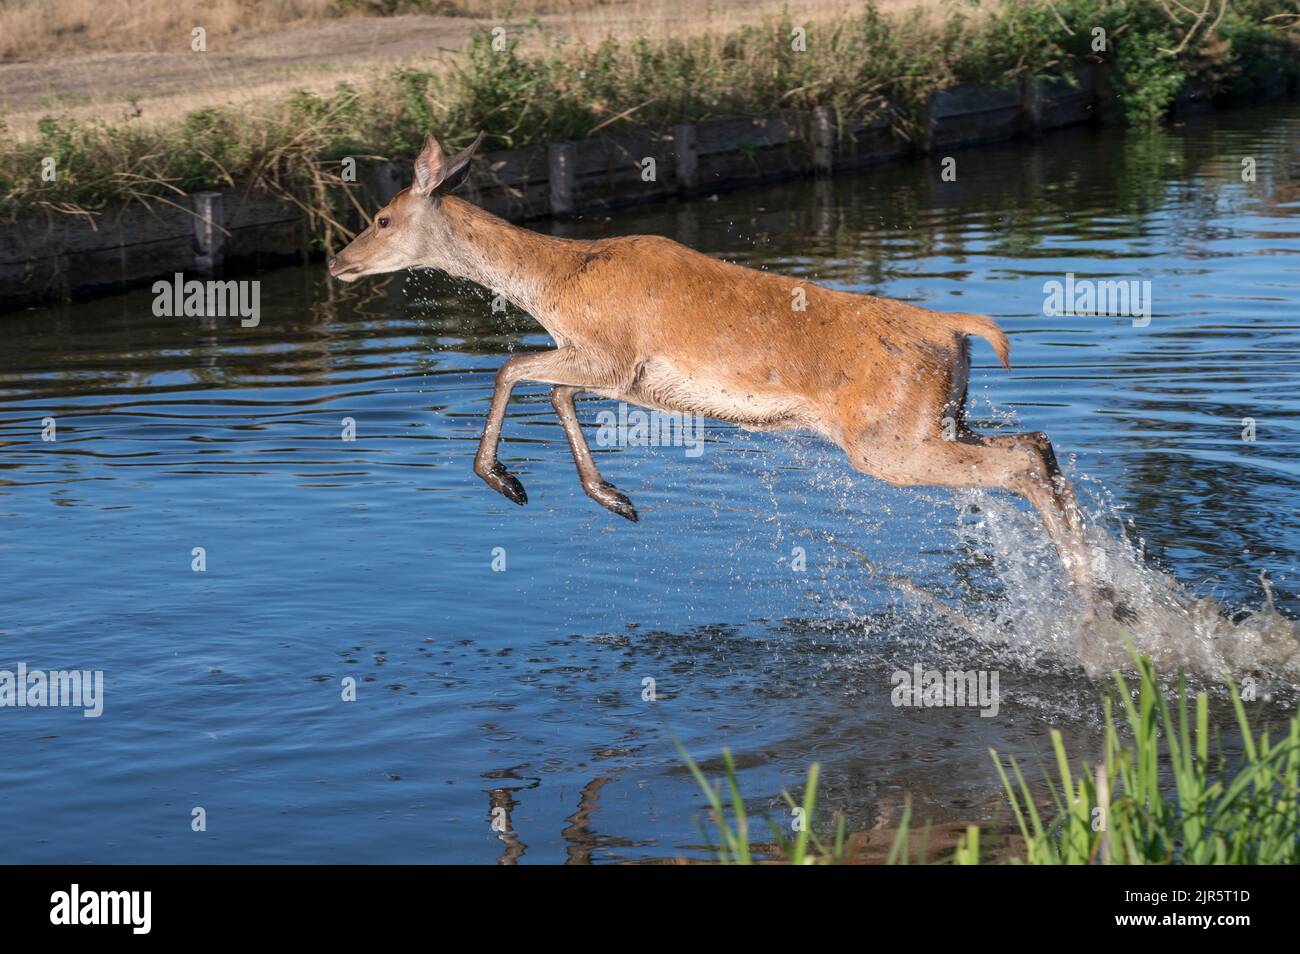 Deer trusting the depth of water with a leap of faith Stock Photo